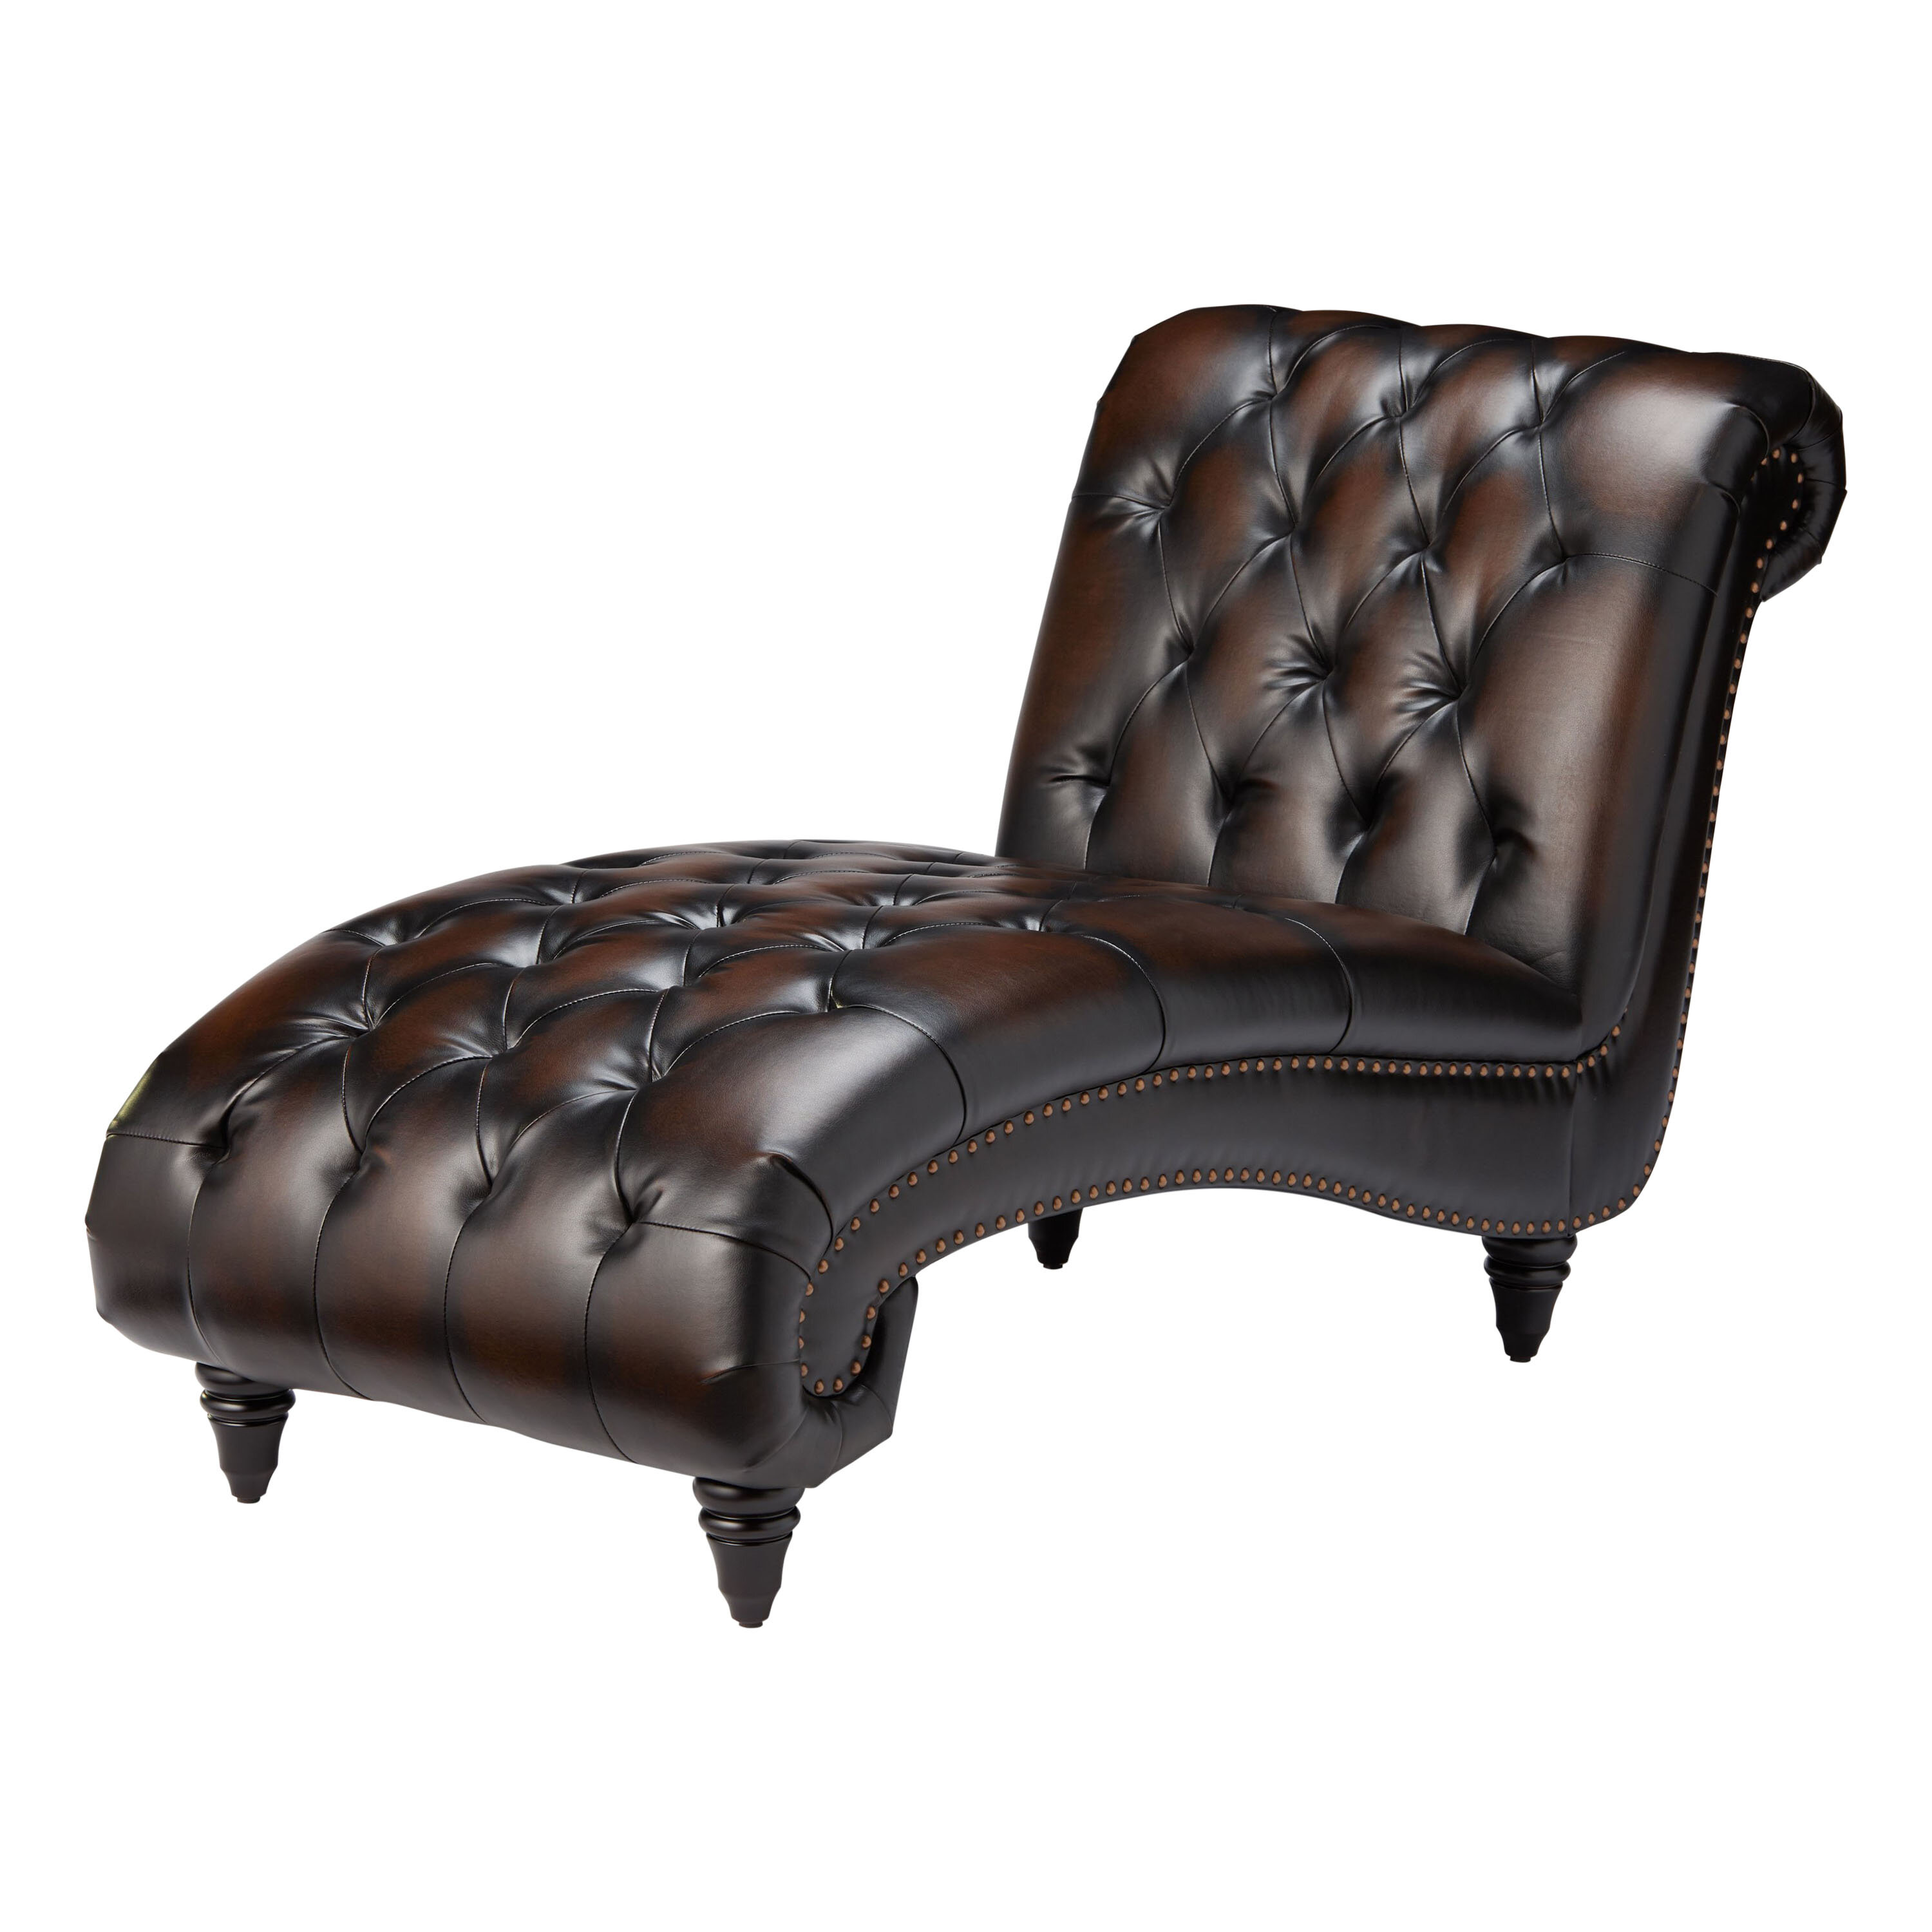 Nailheads Chaise Lounge Chairs Youll Love In 2021 Wayfair